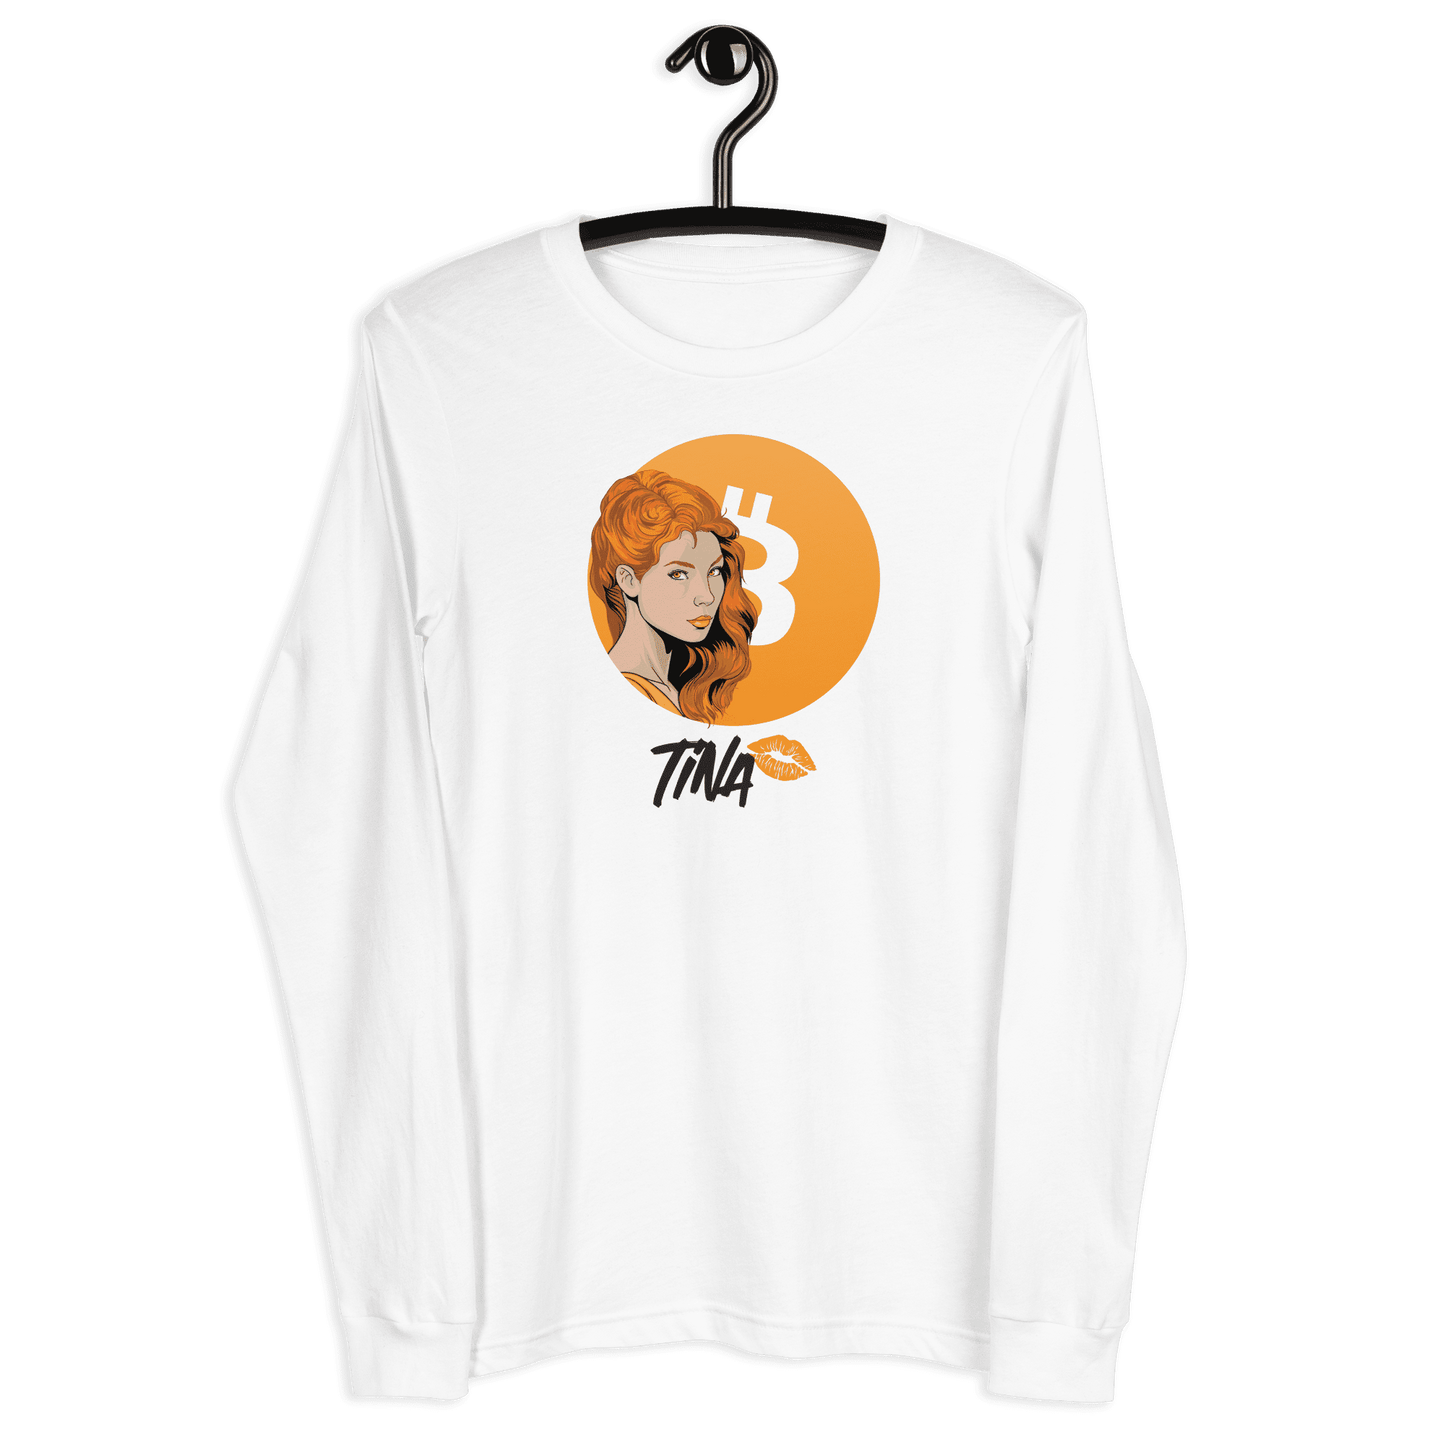 Front view of a white bitcoin long sleeve tee.